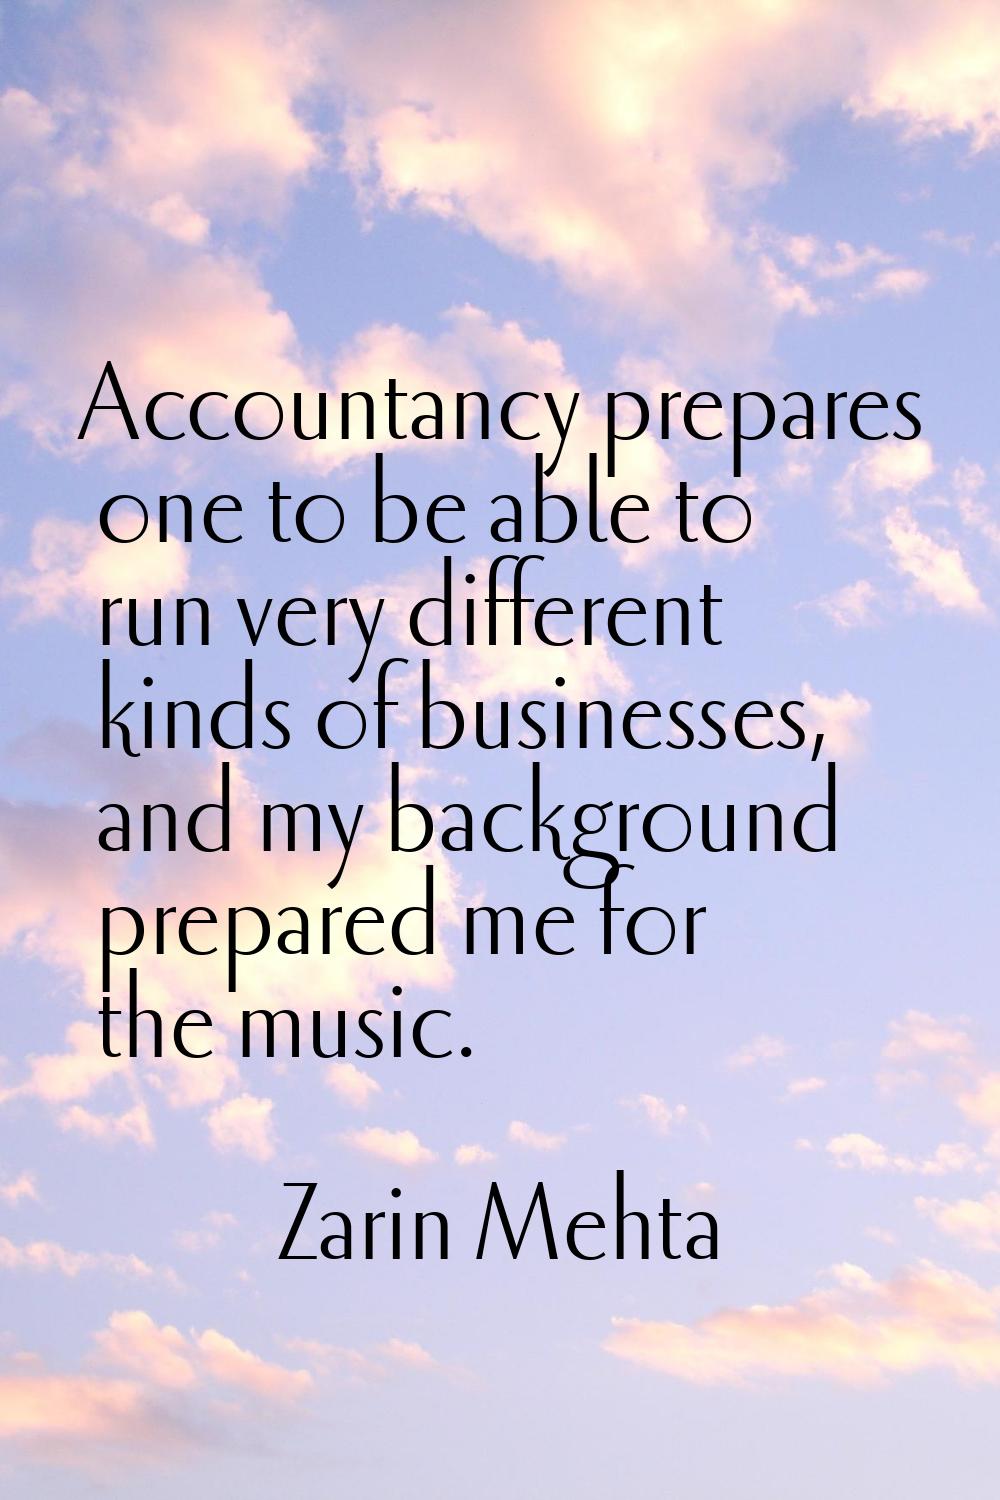 Accountancy prepares one to be able to run very different kinds of businesses, and my background pr